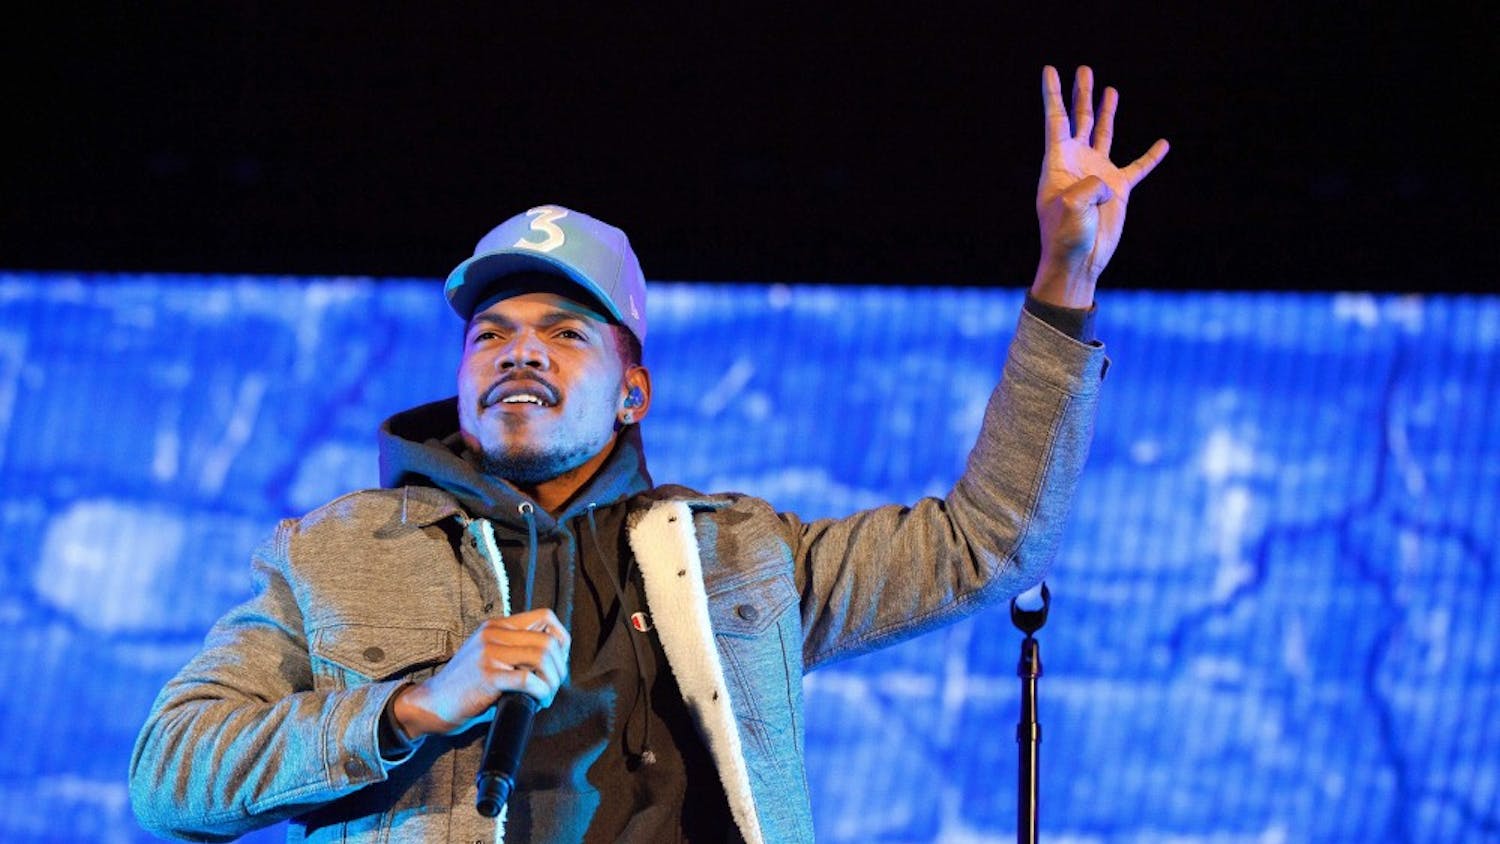 Chance The Rapper in concert on May 2, 2017 at Red Rocks, Morrison, Colo. (Marshall/Rex Shutterstock/Zuma Press/TNS)